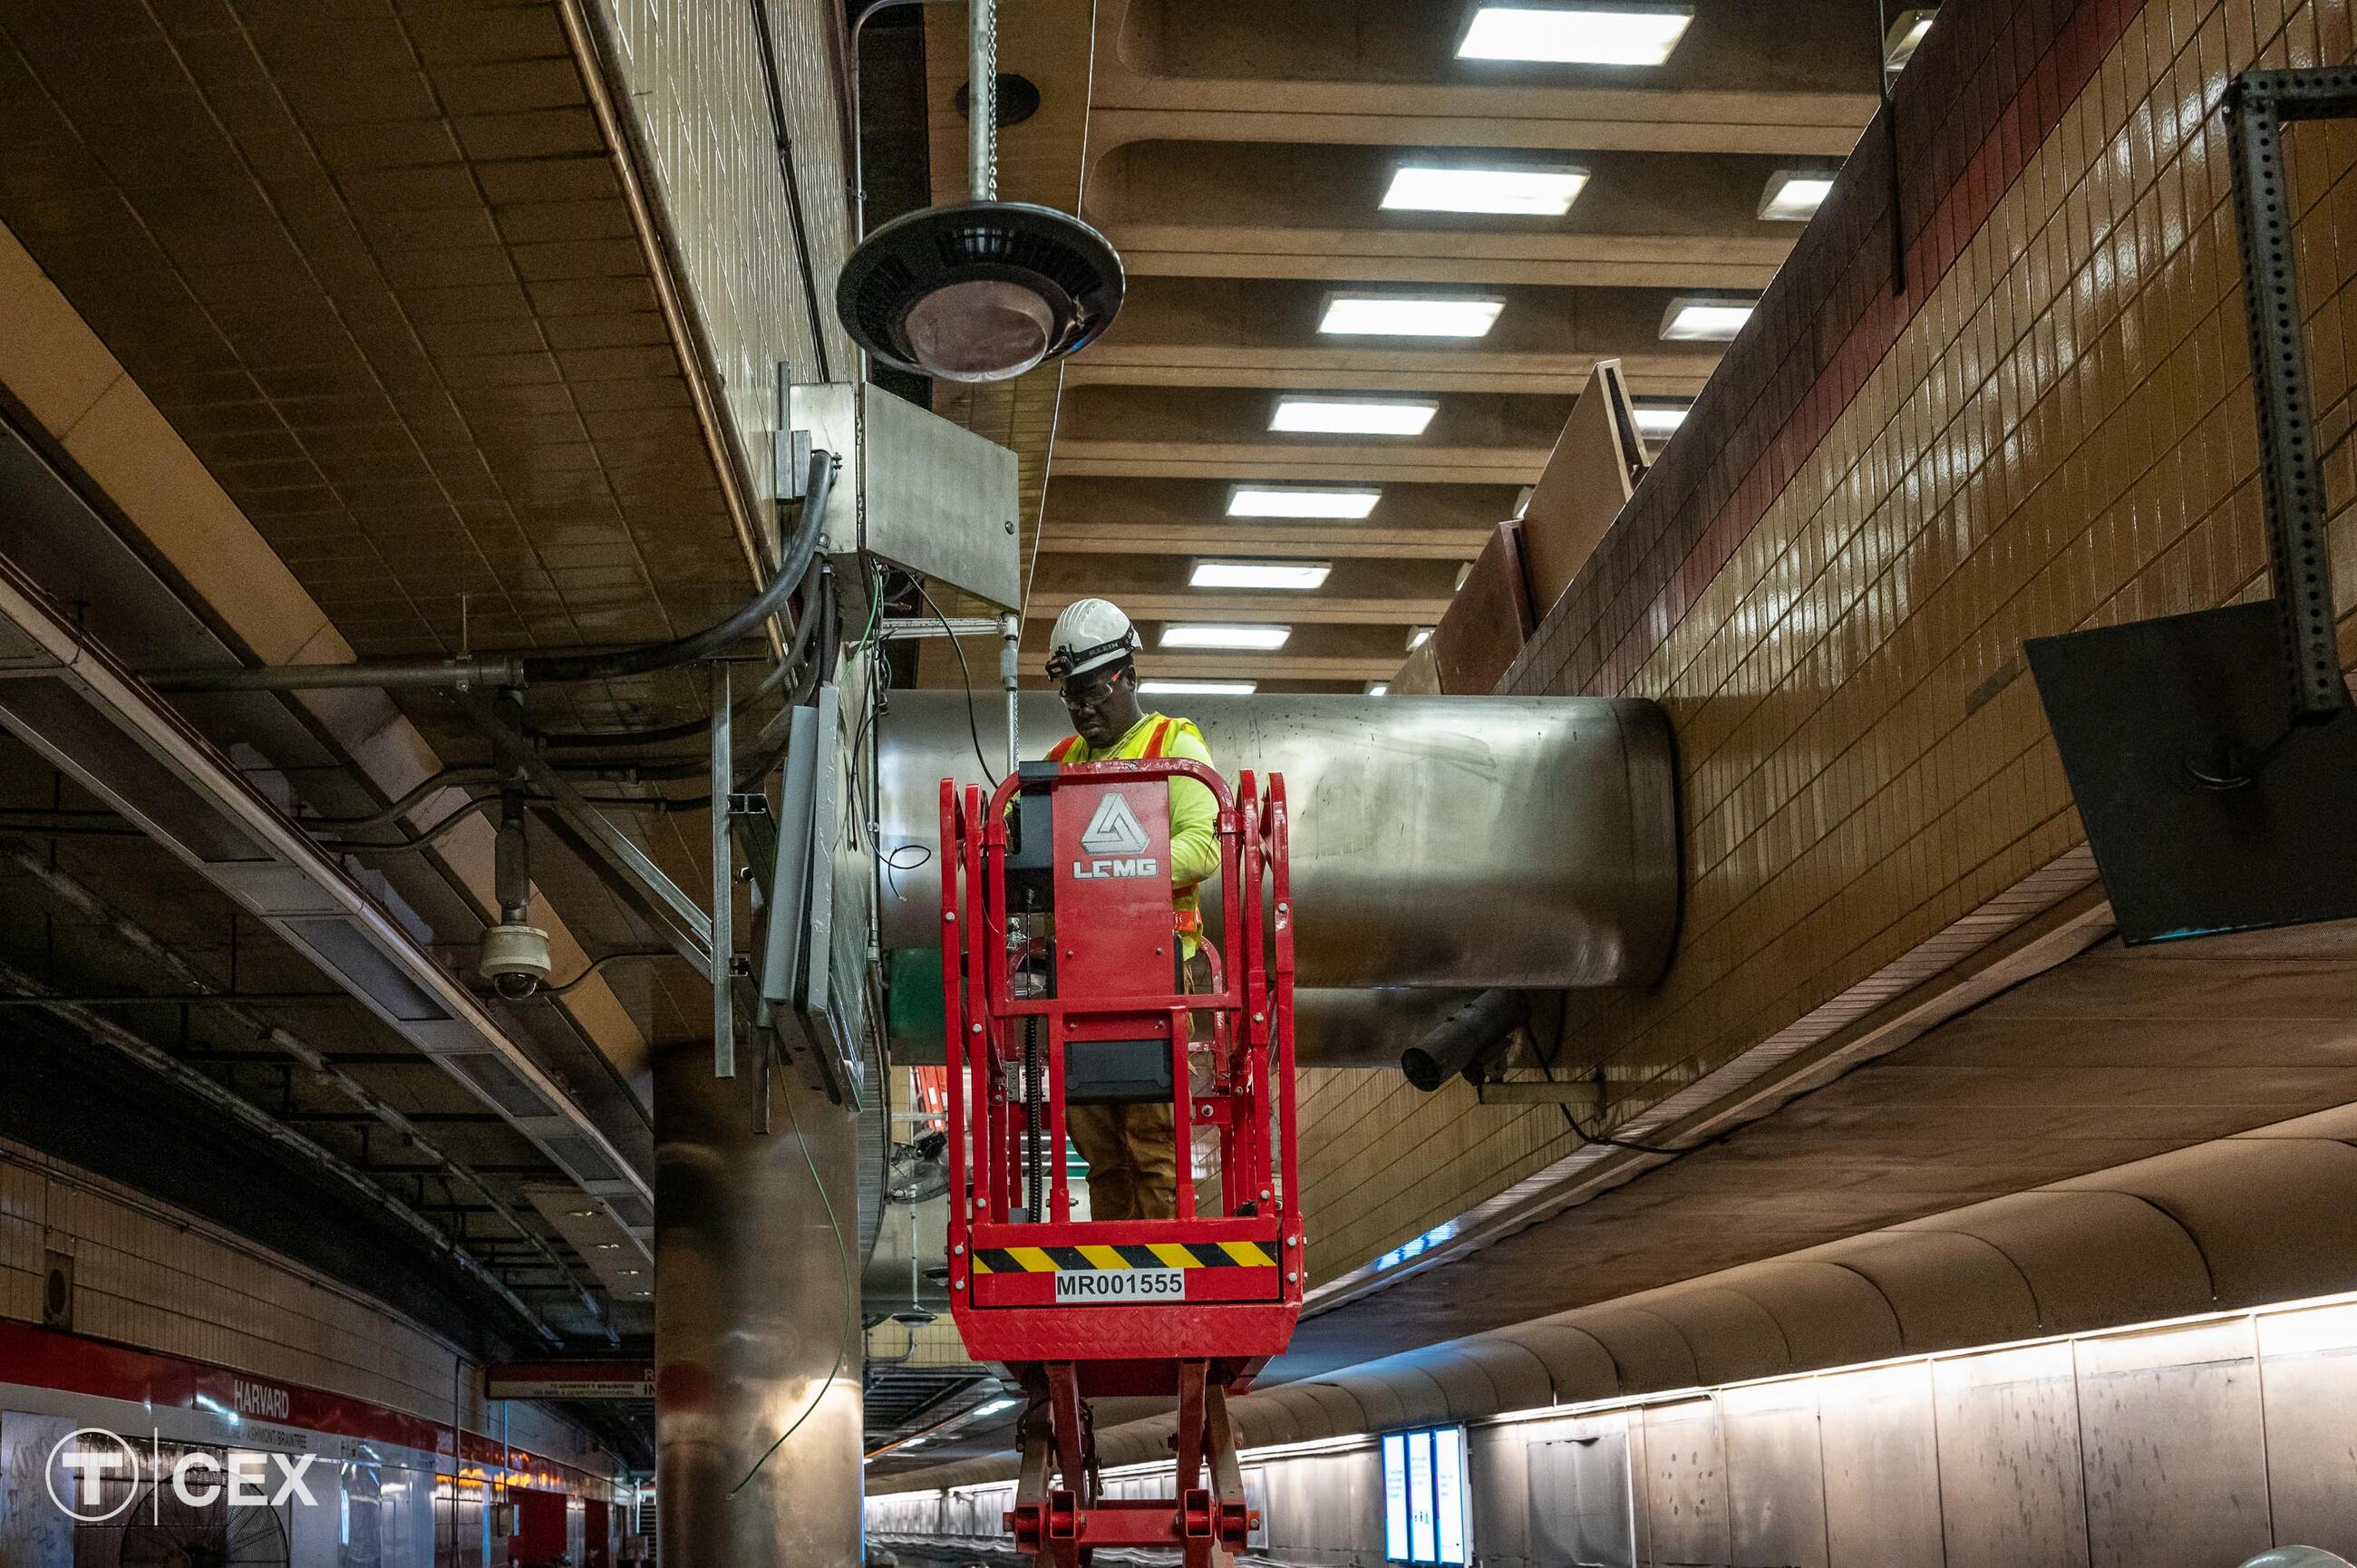 Work was also completed within Red Line stations during this service suspension. Complimentary photo by the MBTA Customer and Employee Experience Department. 